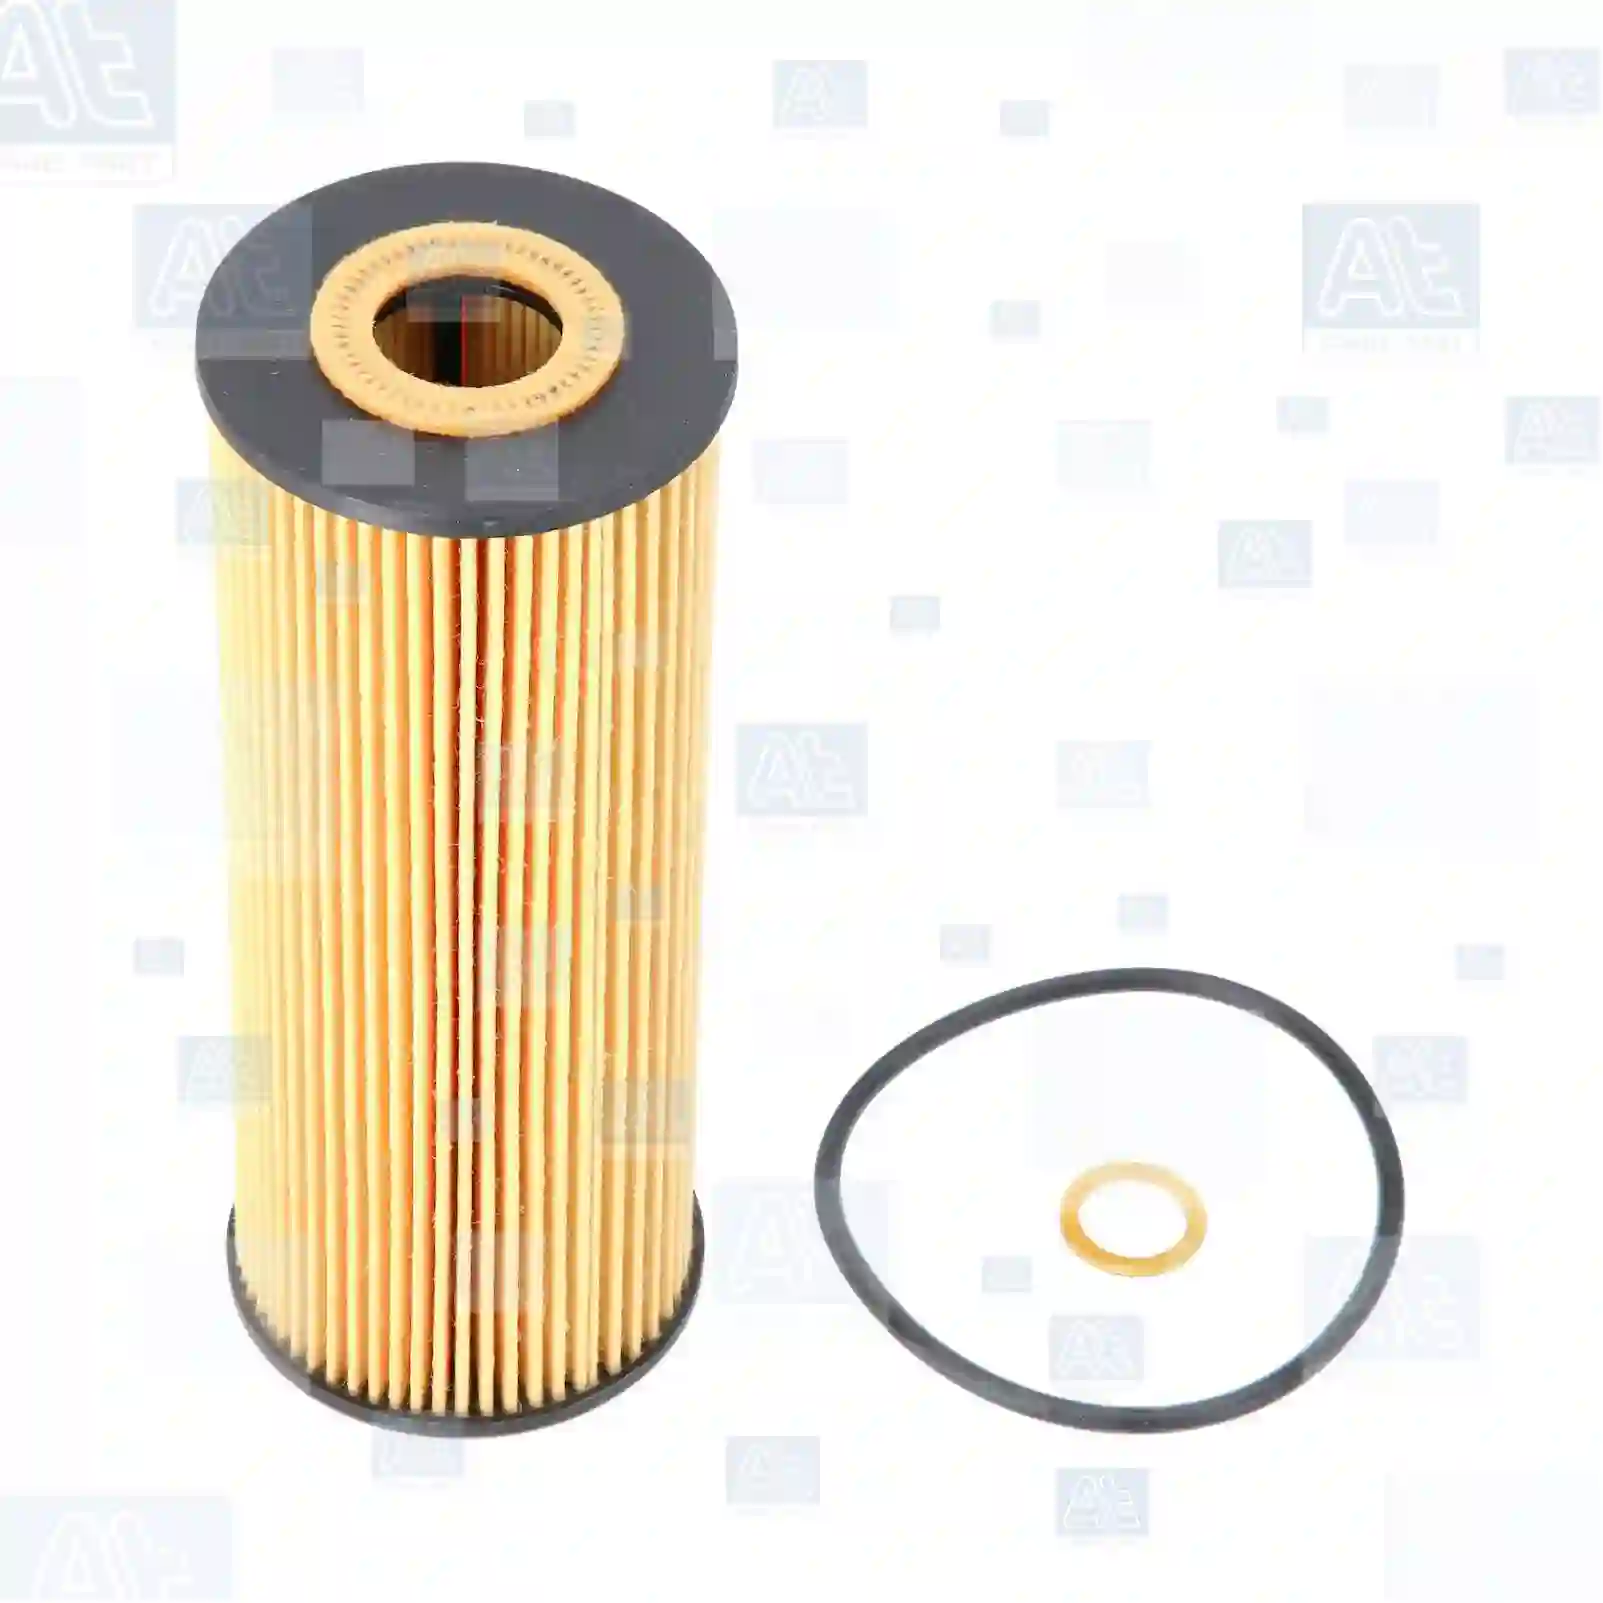 Oil filter insert, at no 77702105, oem no: X517, 1621843025, 1212485, 1041800109, 1041800509, 1041800709, 1041800825, 1041840109, 1041840205, 1041840225, 1041840325, 1041840425, 1041840825, 1041840925, 1111840225, 1041800109, 1621803009, 1621843025, 00A115466, ZG01744-0008 At Spare Part | Engine, Accelerator Pedal, Camshaft, Connecting Rod, Crankcase, Crankshaft, Cylinder Head, Engine Suspension Mountings, Exhaust Manifold, Exhaust Gas Recirculation, Filter Kits, Flywheel Housing, General Overhaul Kits, Engine, Intake Manifold, Oil Cleaner, Oil Cooler, Oil Filter, Oil Pump, Oil Sump, Piston & Liner, Sensor & Switch, Timing Case, Turbocharger, Cooling System, Belt Tensioner, Coolant Filter, Coolant Pipe, Corrosion Prevention Agent, Drive, Expansion Tank, Fan, Intercooler, Monitors & Gauges, Radiator, Thermostat, V-Belt / Timing belt, Water Pump, Fuel System, Electronical Injector Unit, Feed Pump, Fuel Filter, cpl., Fuel Gauge Sender,  Fuel Line, Fuel Pump, Fuel Tank, Injection Line Kit, Injection Pump, Exhaust System, Clutch & Pedal, Gearbox, Propeller Shaft, Axles, Brake System, Hubs & Wheels, Suspension, Leaf Spring, Universal Parts / Accessories, Steering, Electrical System, Cabin Oil filter insert, at no 77702105, oem no: X517, 1621843025, 1212485, 1041800109, 1041800509, 1041800709, 1041800825, 1041840109, 1041840205, 1041840225, 1041840325, 1041840425, 1041840825, 1041840925, 1111840225, 1041800109, 1621803009, 1621843025, 00A115466, ZG01744-0008 At Spare Part | Engine, Accelerator Pedal, Camshaft, Connecting Rod, Crankcase, Crankshaft, Cylinder Head, Engine Suspension Mountings, Exhaust Manifold, Exhaust Gas Recirculation, Filter Kits, Flywheel Housing, General Overhaul Kits, Engine, Intake Manifold, Oil Cleaner, Oil Cooler, Oil Filter, Oil Pump, Oil Sump, Piston & Liner, Sensor & Switch, Timing Case, Turbocharger, Cooling System, Belt Tensioner, Coolant Filter, Coolant Pipe, Corrosion Prevention Agent, Drive, Expansion Tank, Fan, Intercooler, Monitors & Gauges, Radiator, Thermostat, V-Belt / Timing belt, Water Pump, Fuel System, Electronical Injector Unit, Feed Pump, Fuel Filter, cpl., Fuel Gauge Sender,  Fuel Line, Fuel Pump, Fuel Tank, Injection Line Kit, Injection Pump, Exhaust System, Clutch & Pedal, Gearbox, Propeller Shaft, Axles, Brake System, Hubs & Wheels, Suspension, Leaf Spring, Universal Parts / Accessories, Steering, Electrical System, Cabin